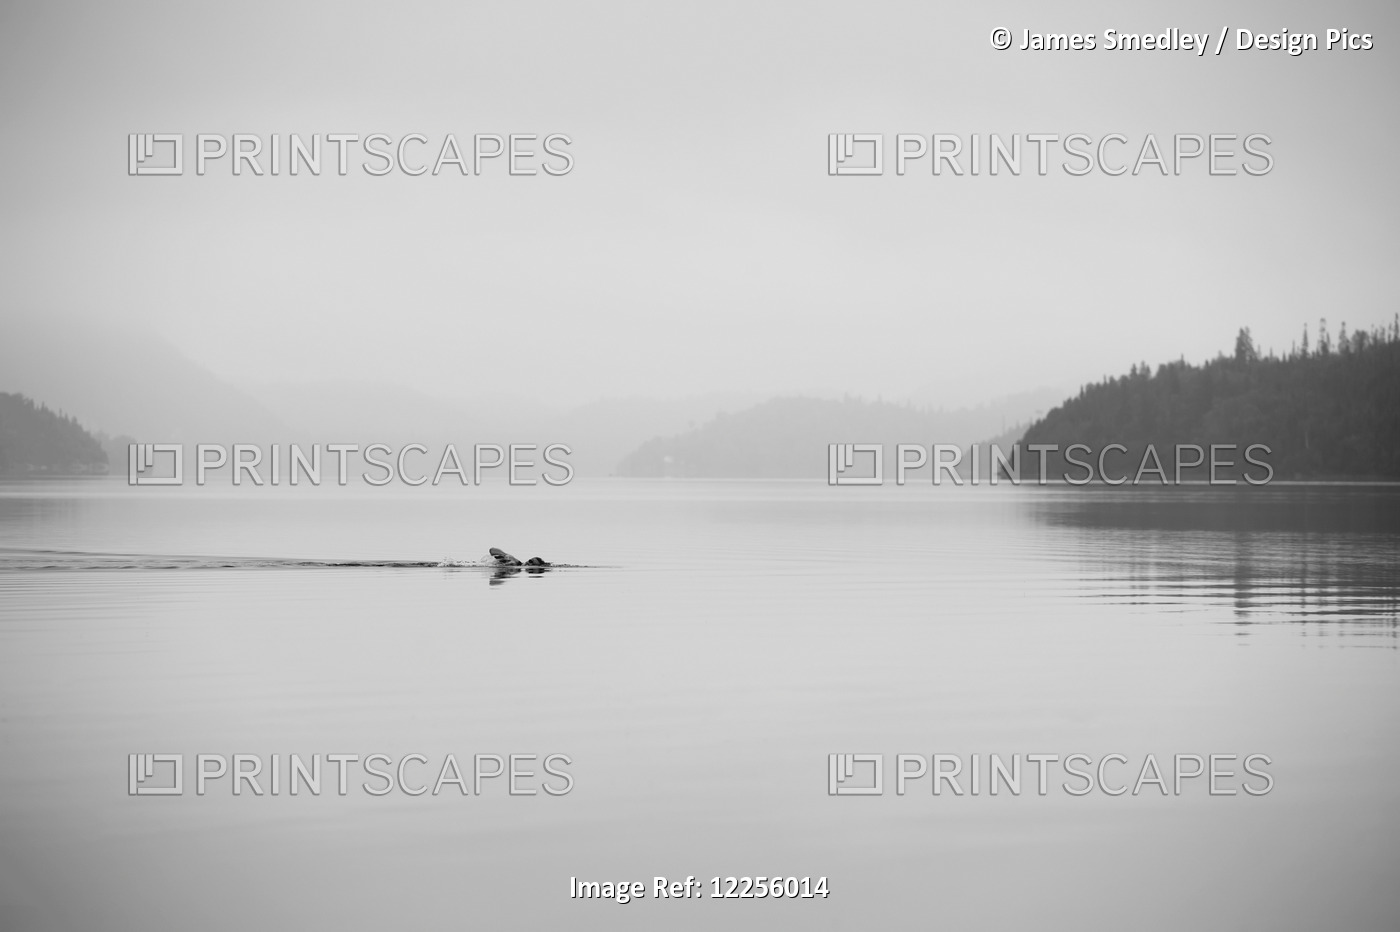 A Lone Swimmer Swims Across A Calm Misty Lake; Ontario, Canada